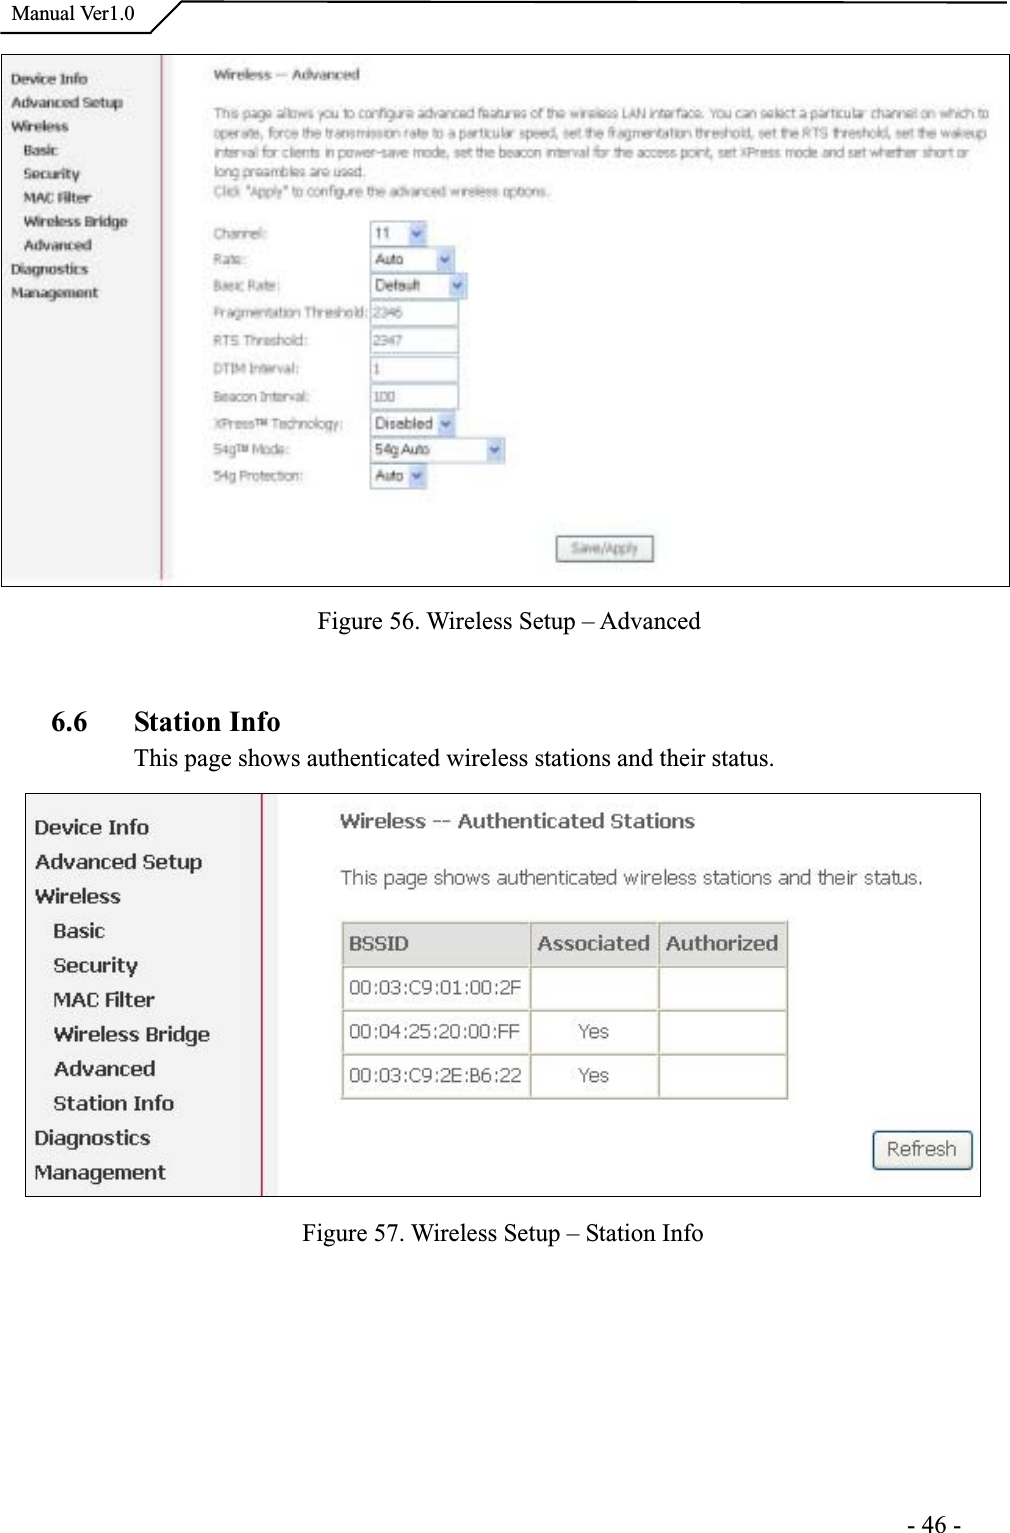  Manual Ver1.0Figure 56. Wireless Setup – Advanced6.6 Station InfoThis page shows authenticated wireless stations and their status. Figure 57. Wireless Setup – Station Info                                                                      -46-